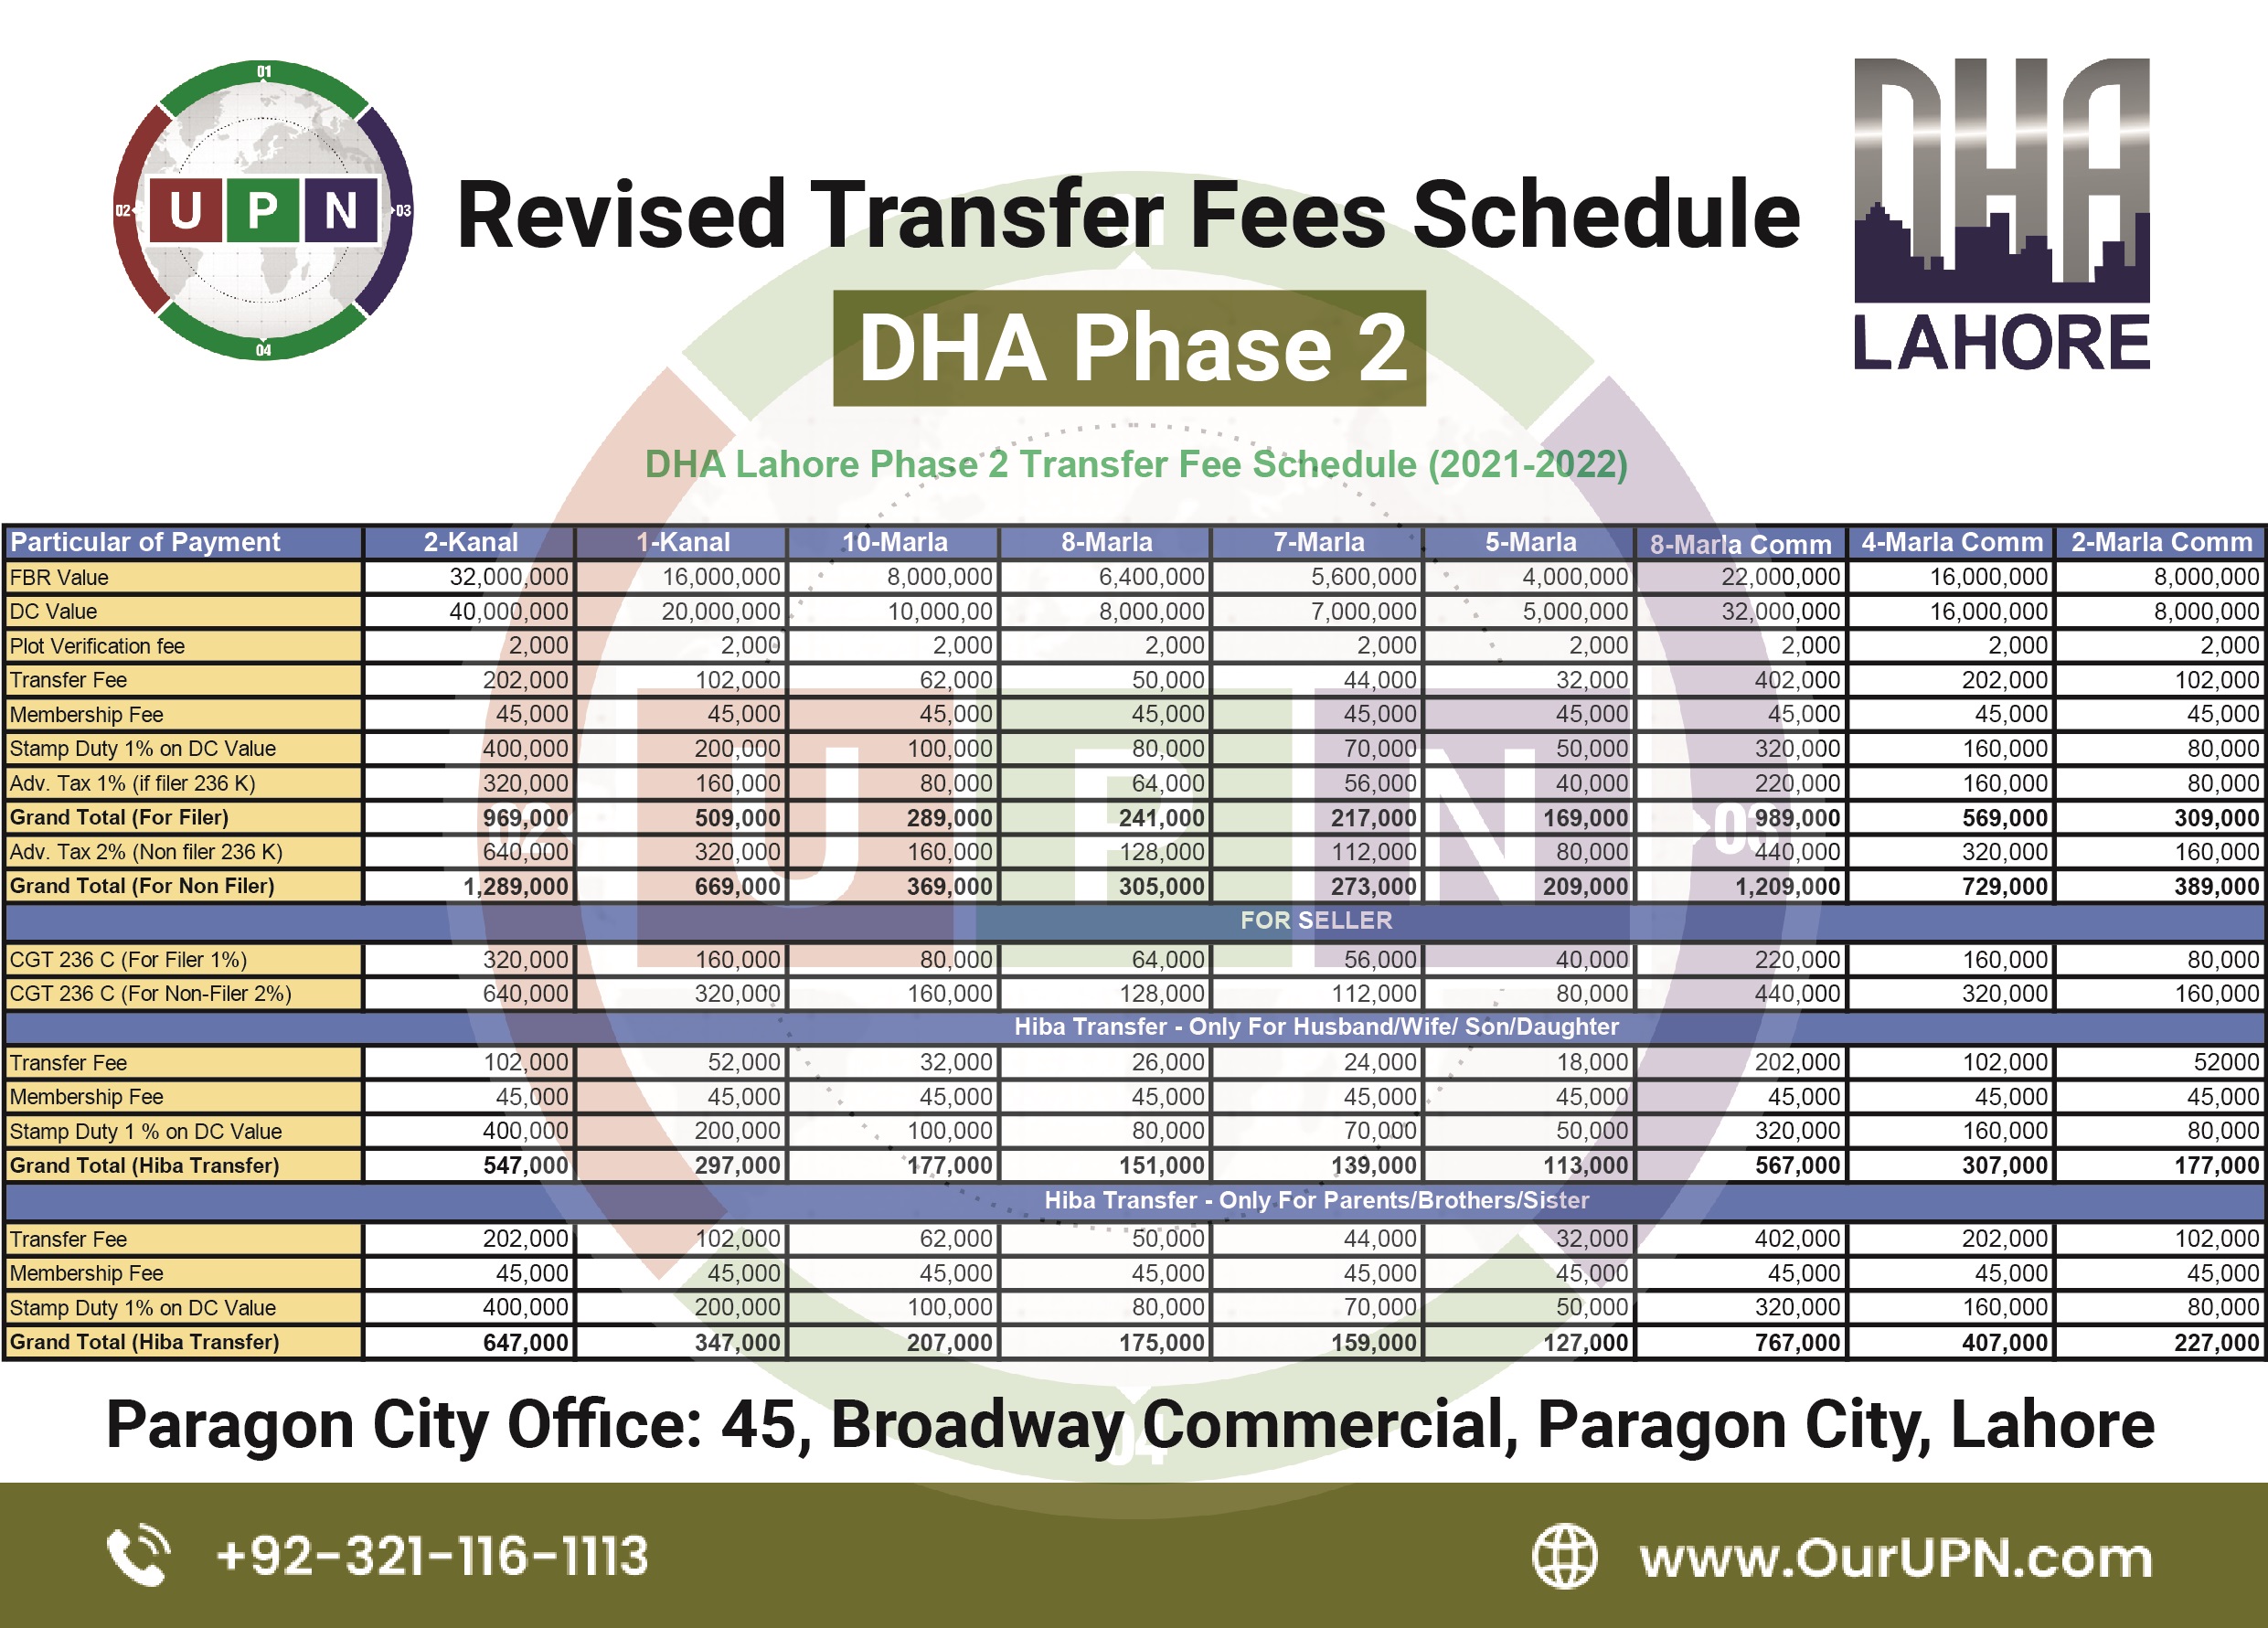 DHA LAHORE PHASE 2 Transfer fee Charges